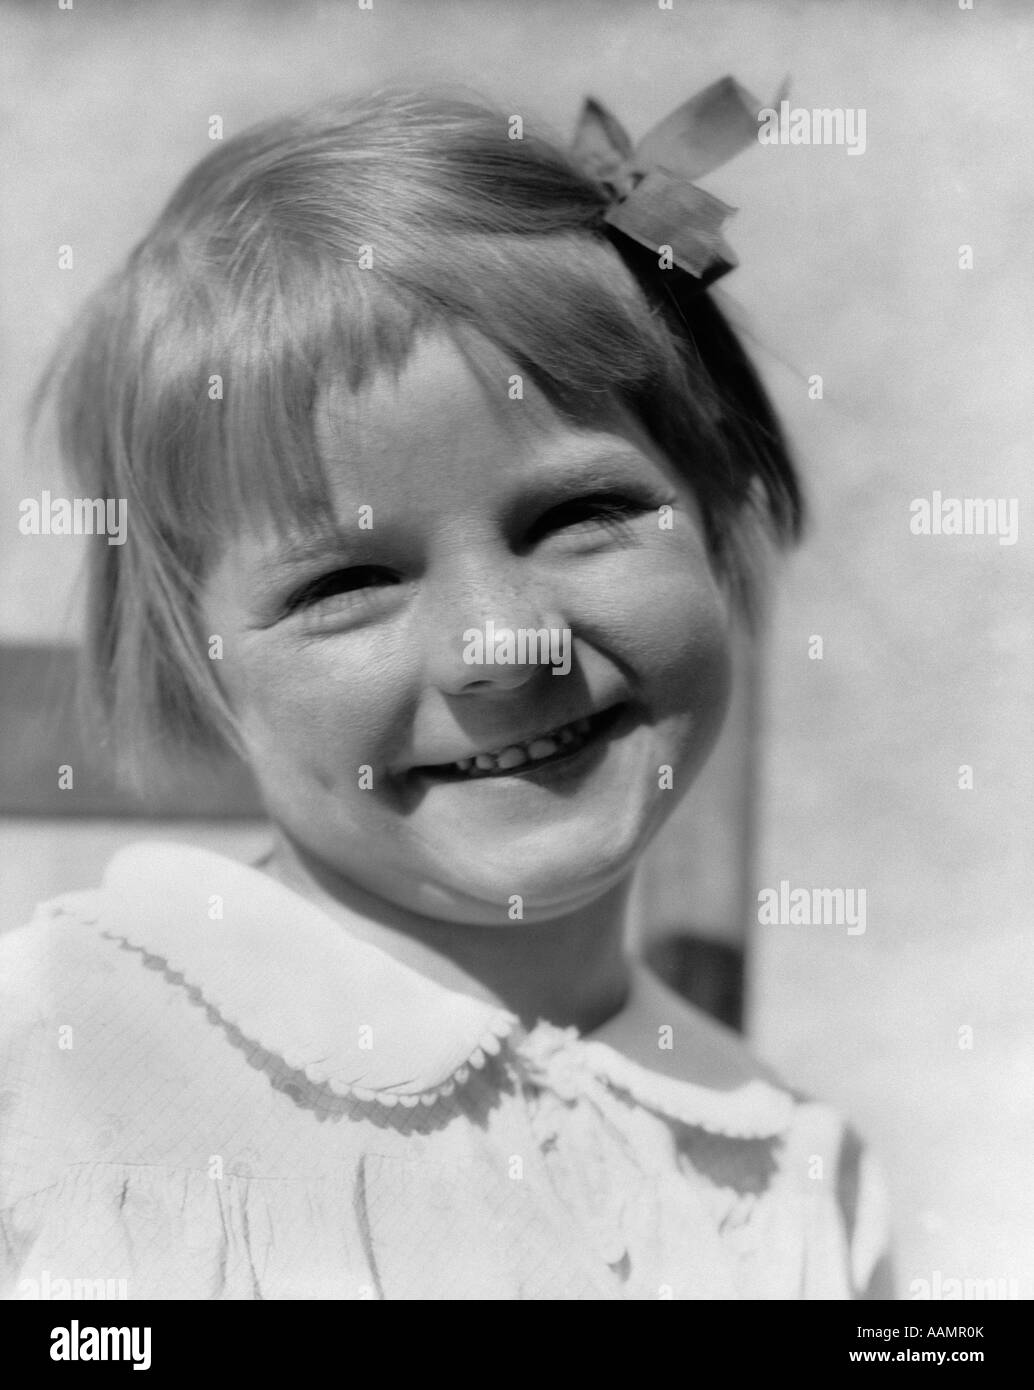 1930s YOUNG GIRL OUTDOOR PORTRAIT WITH FRECKLES AND BOW IN HAIR SMILING AT CAMERA Stock Photo